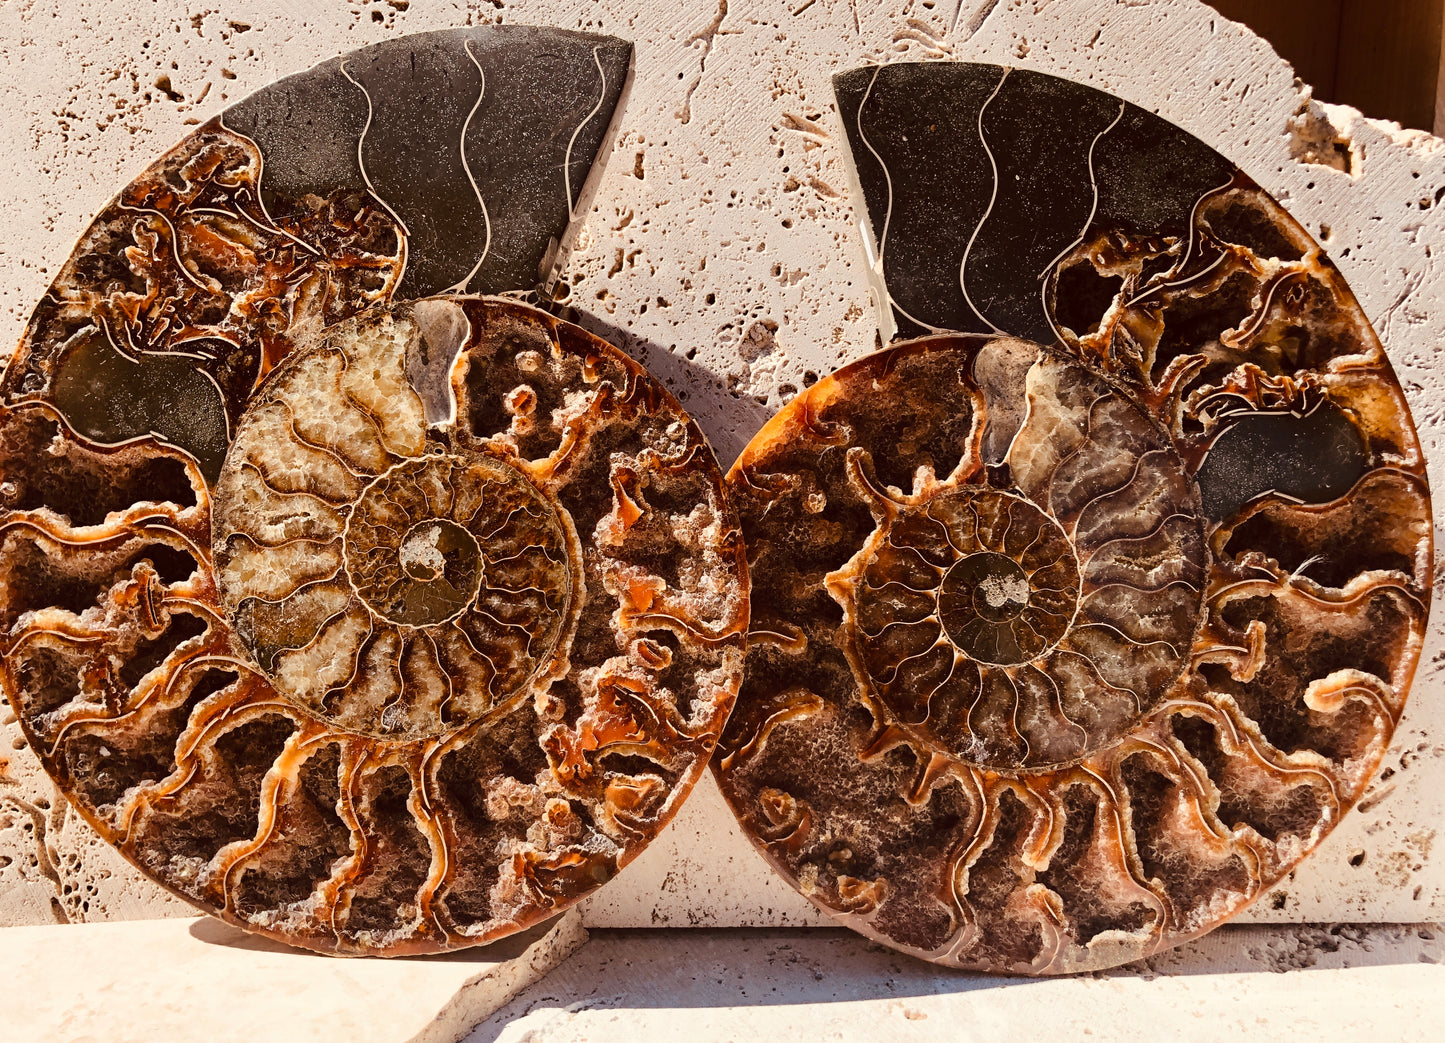 Larger Ammonite Fossilized Slices with Druzy